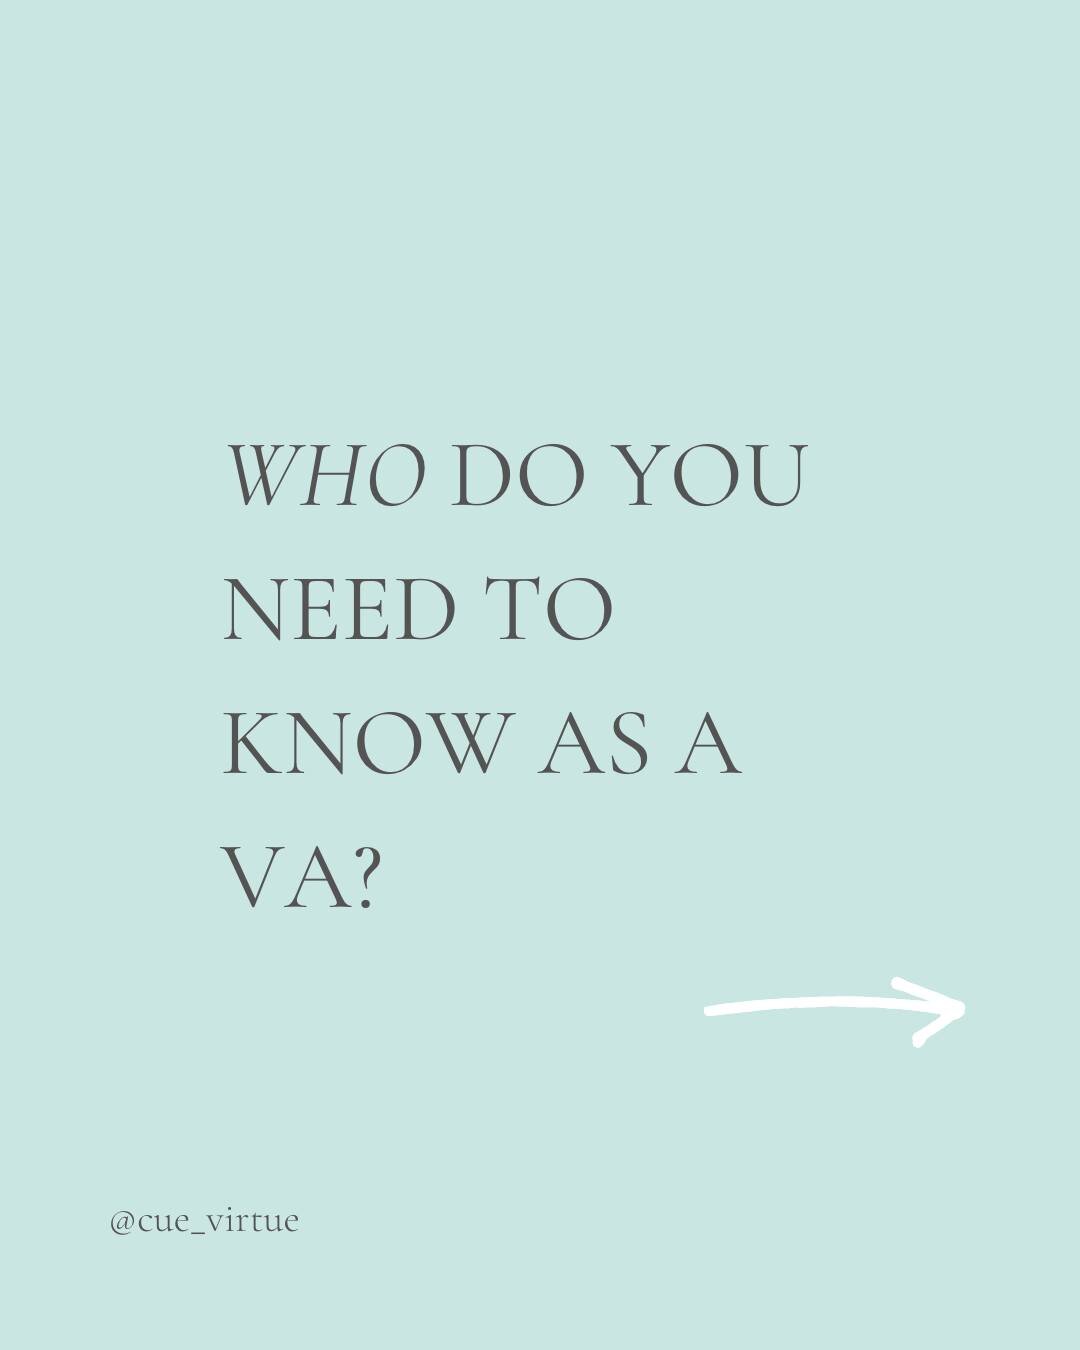 🤔 Who do you need to know as a VA? 

💻 The virtual assistant industry is thriving, but there's more to it than just logging in and typing away. You need to know who to talk to, and what kind of activities will get your business up and running. 

👇